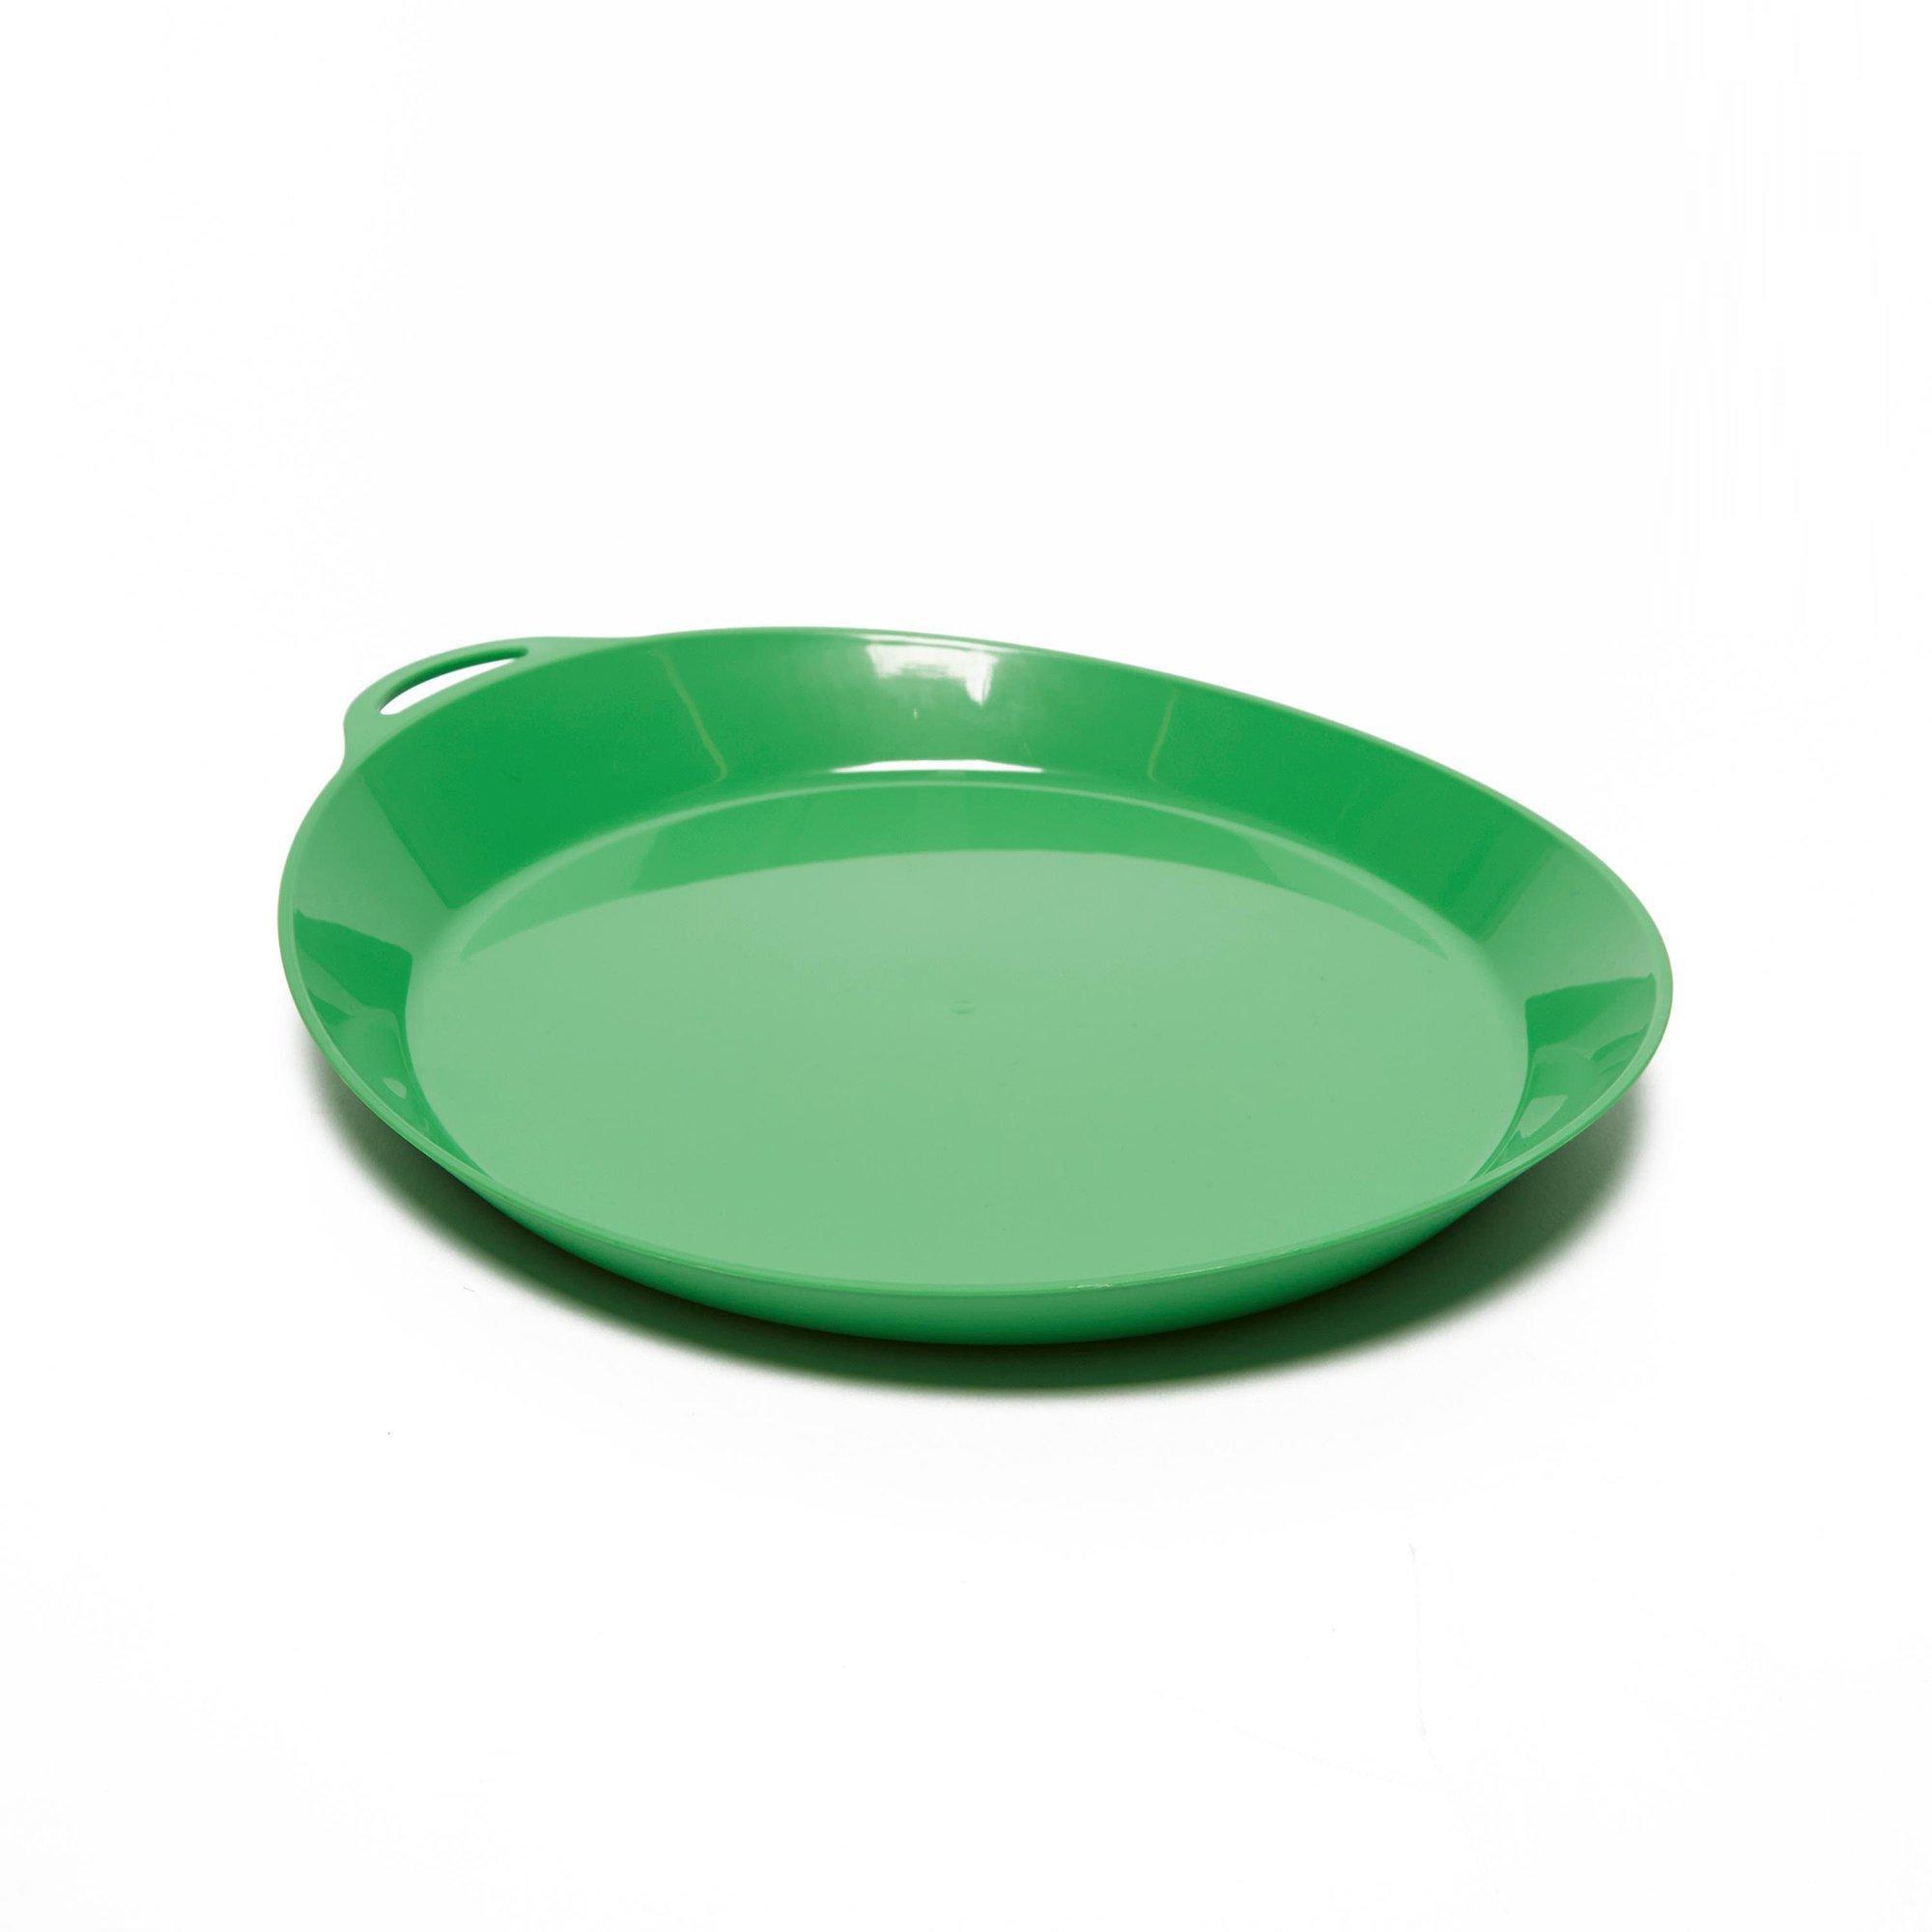 product image of Lifeventure Ellipse Plate, Green